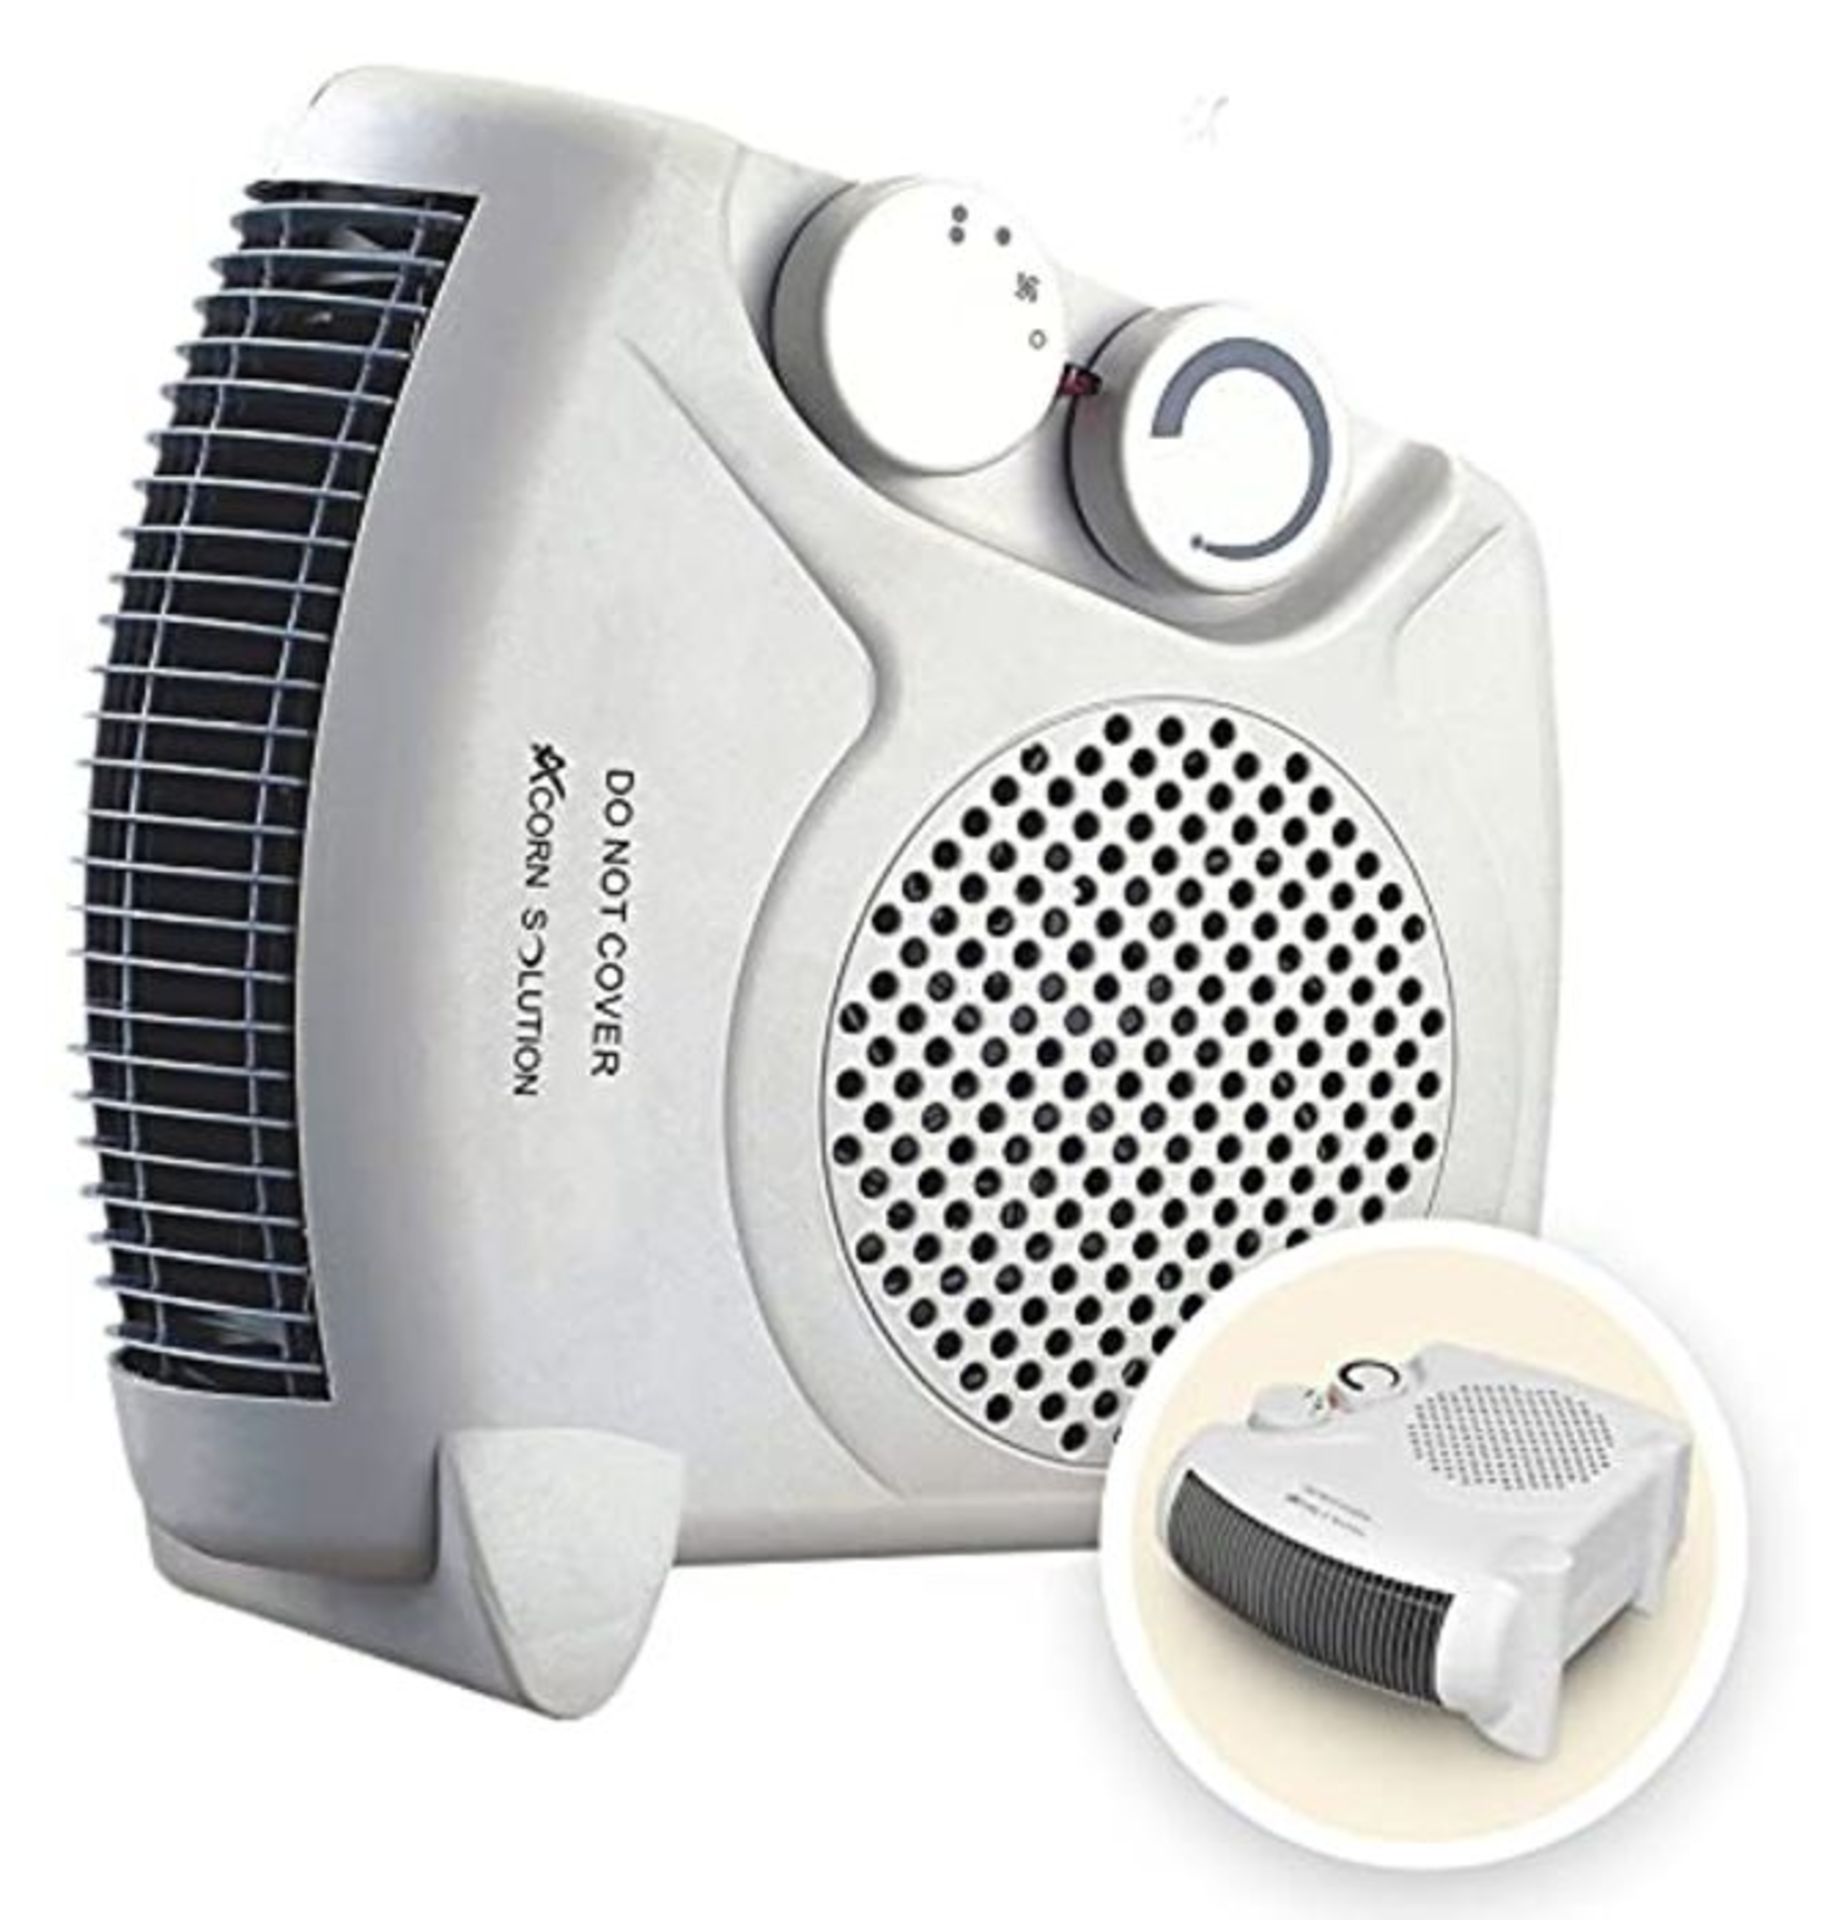 AcornSolution Electric Fan Heater, Portable 2KW Fan Heater with Adjustable Thermostat